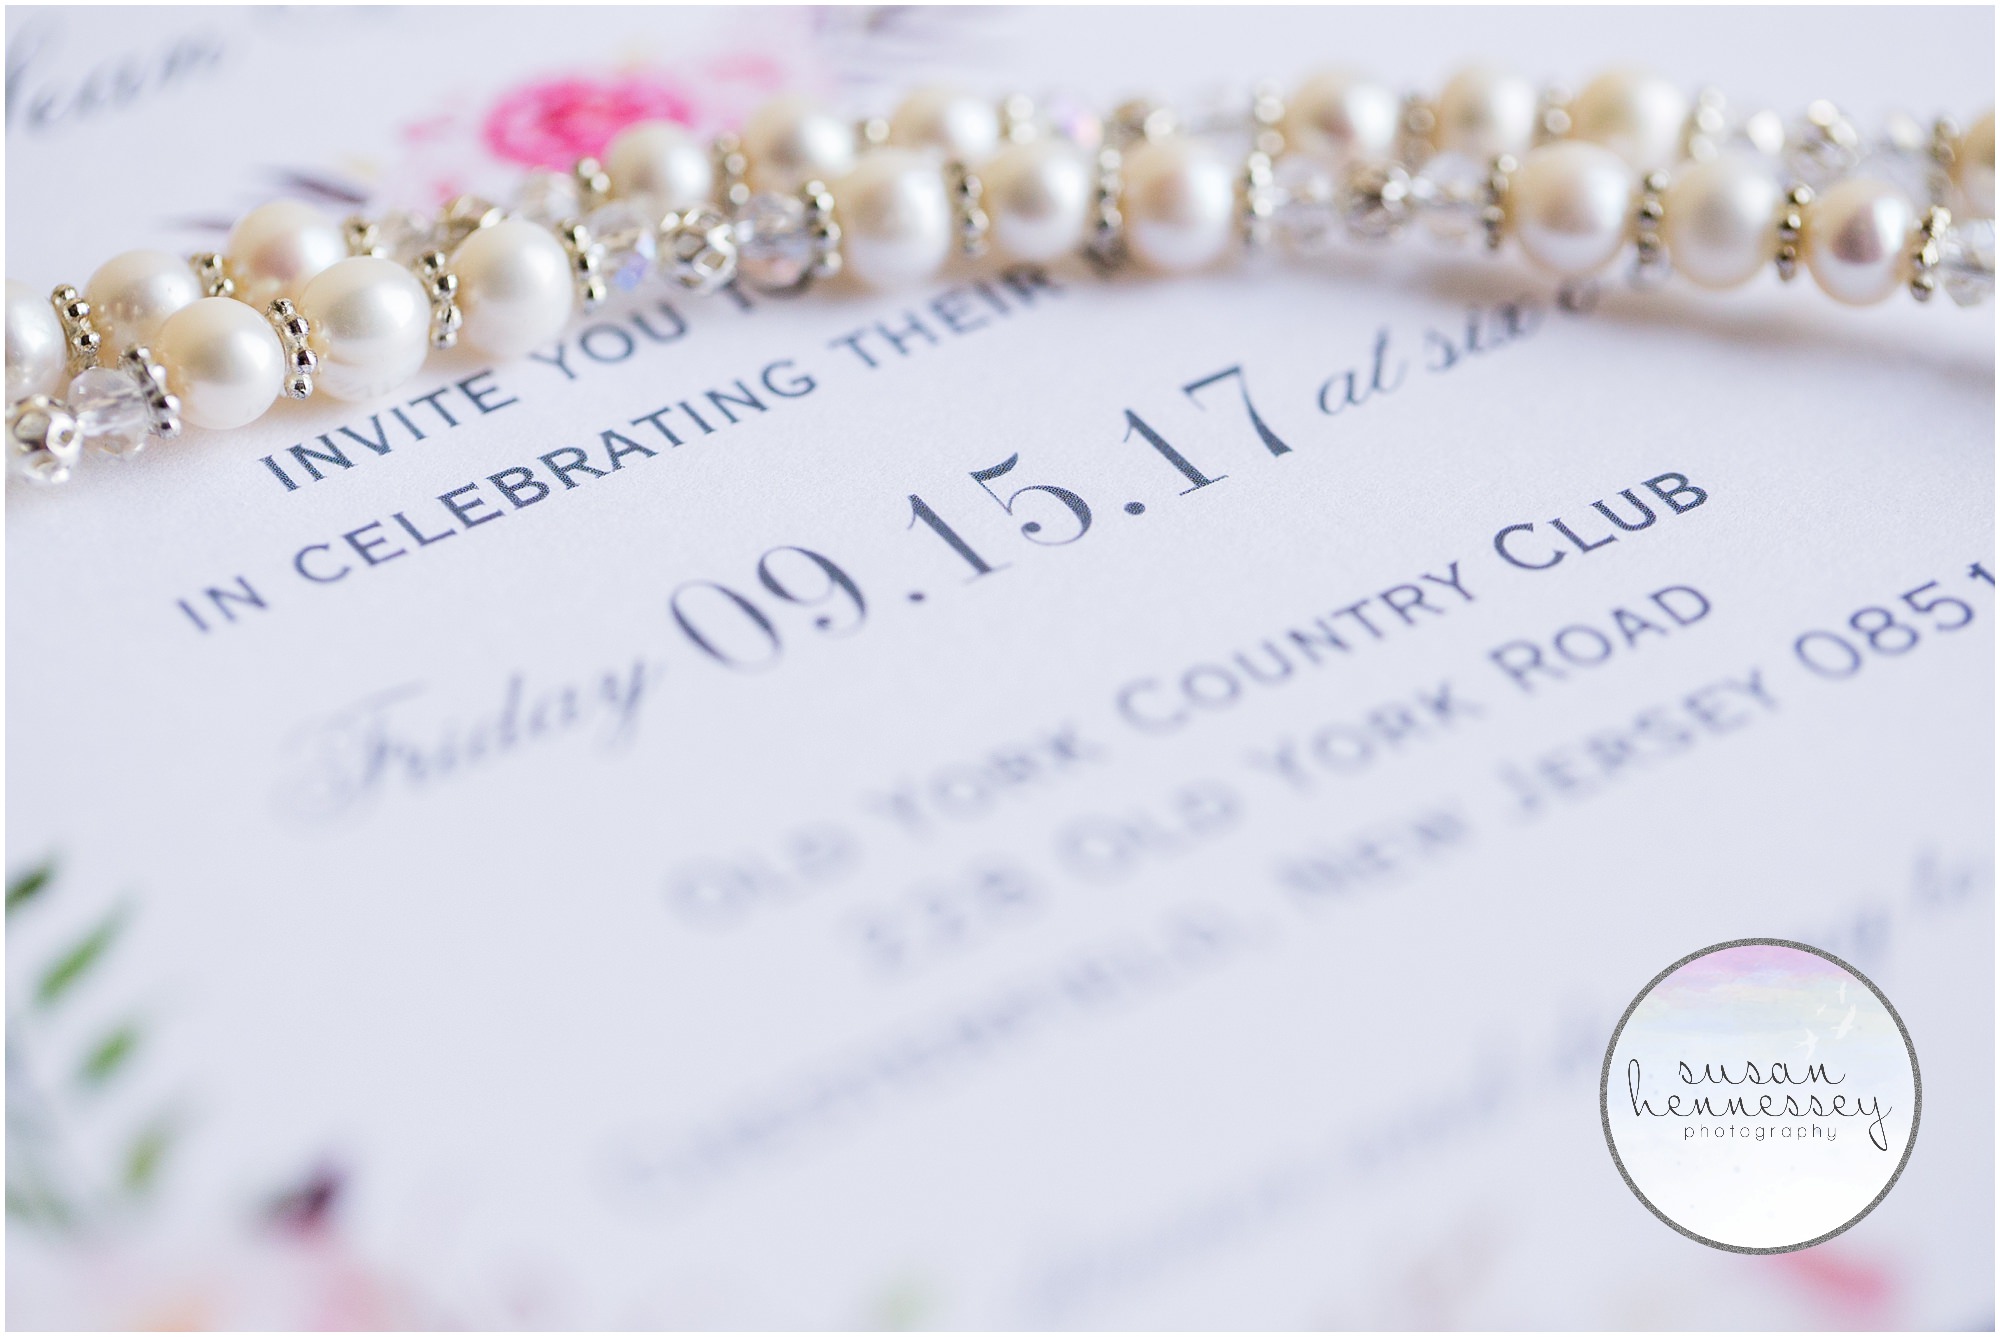 Detail of wedding invitation for Old York Country Club wedding.